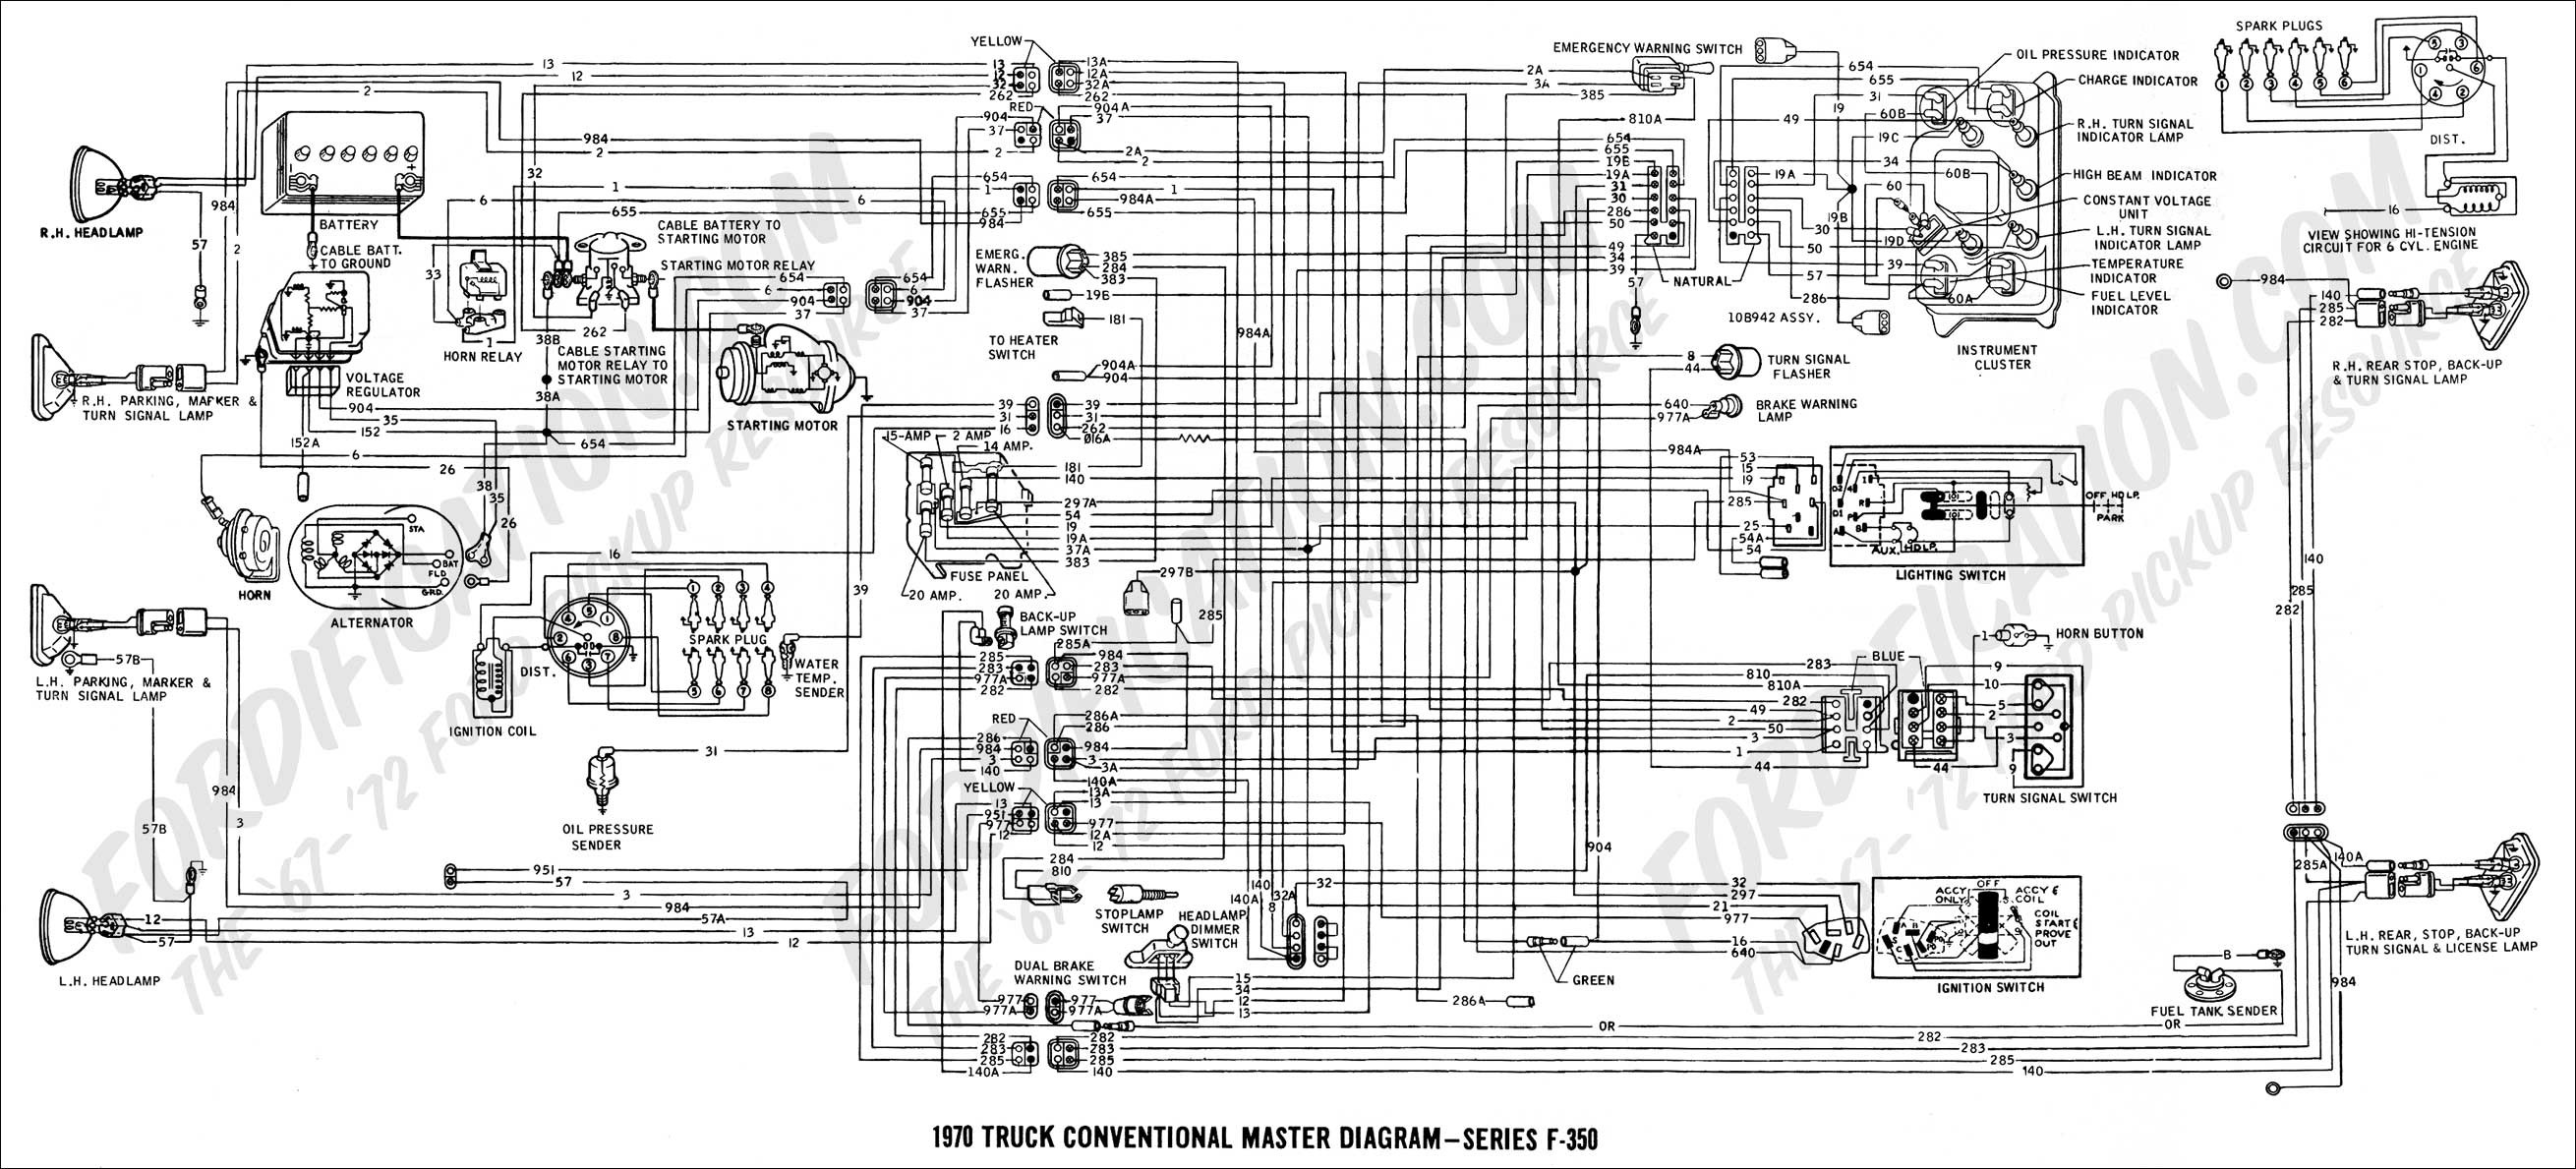 2008 Shelby Fuse Diagram Wiring Diagram